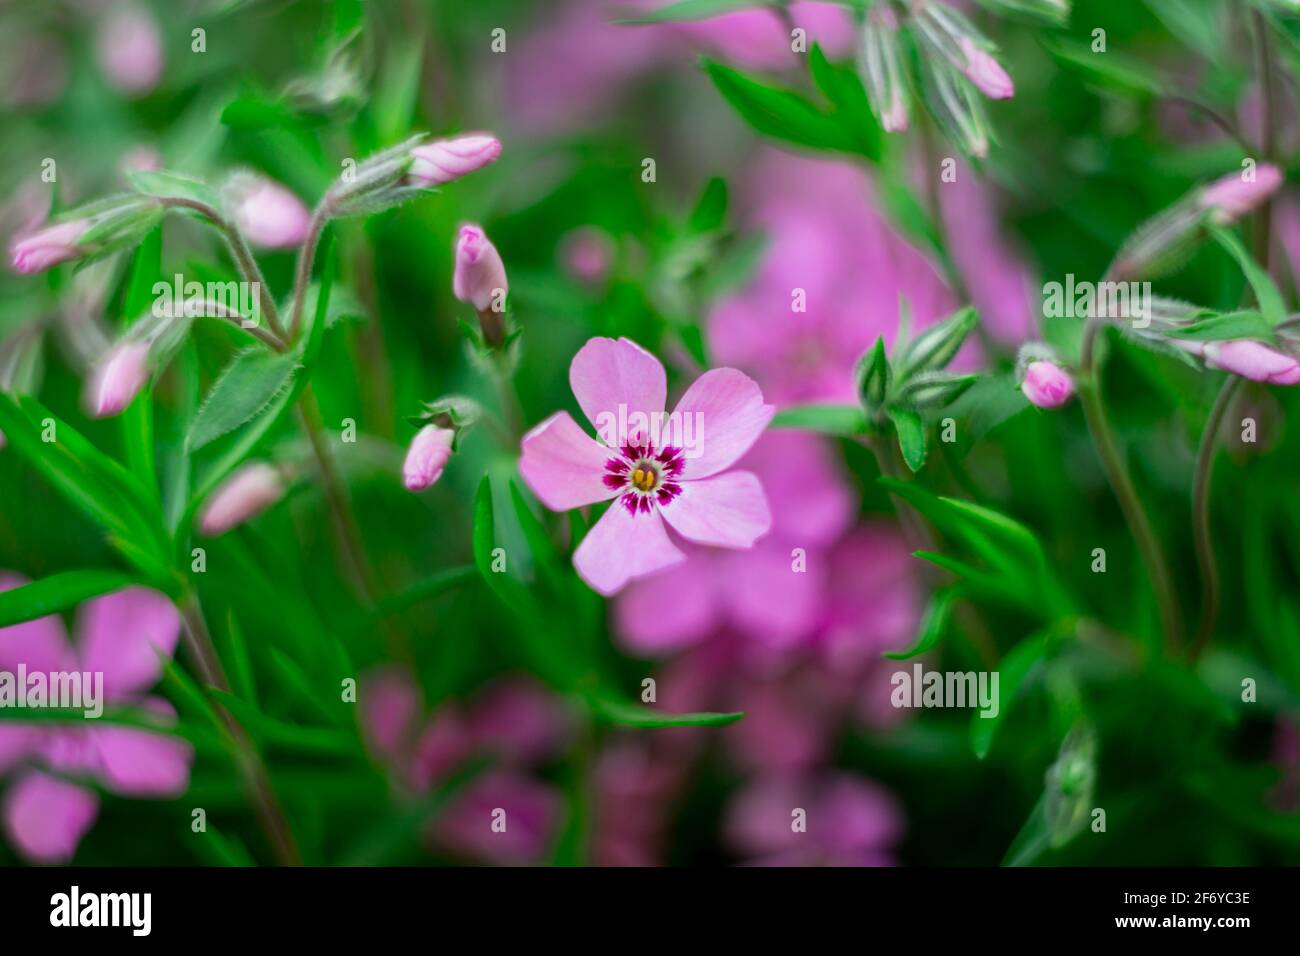 Purple phlox flowers in green leaves. Close-up photo. Selective focus. Stock Photo